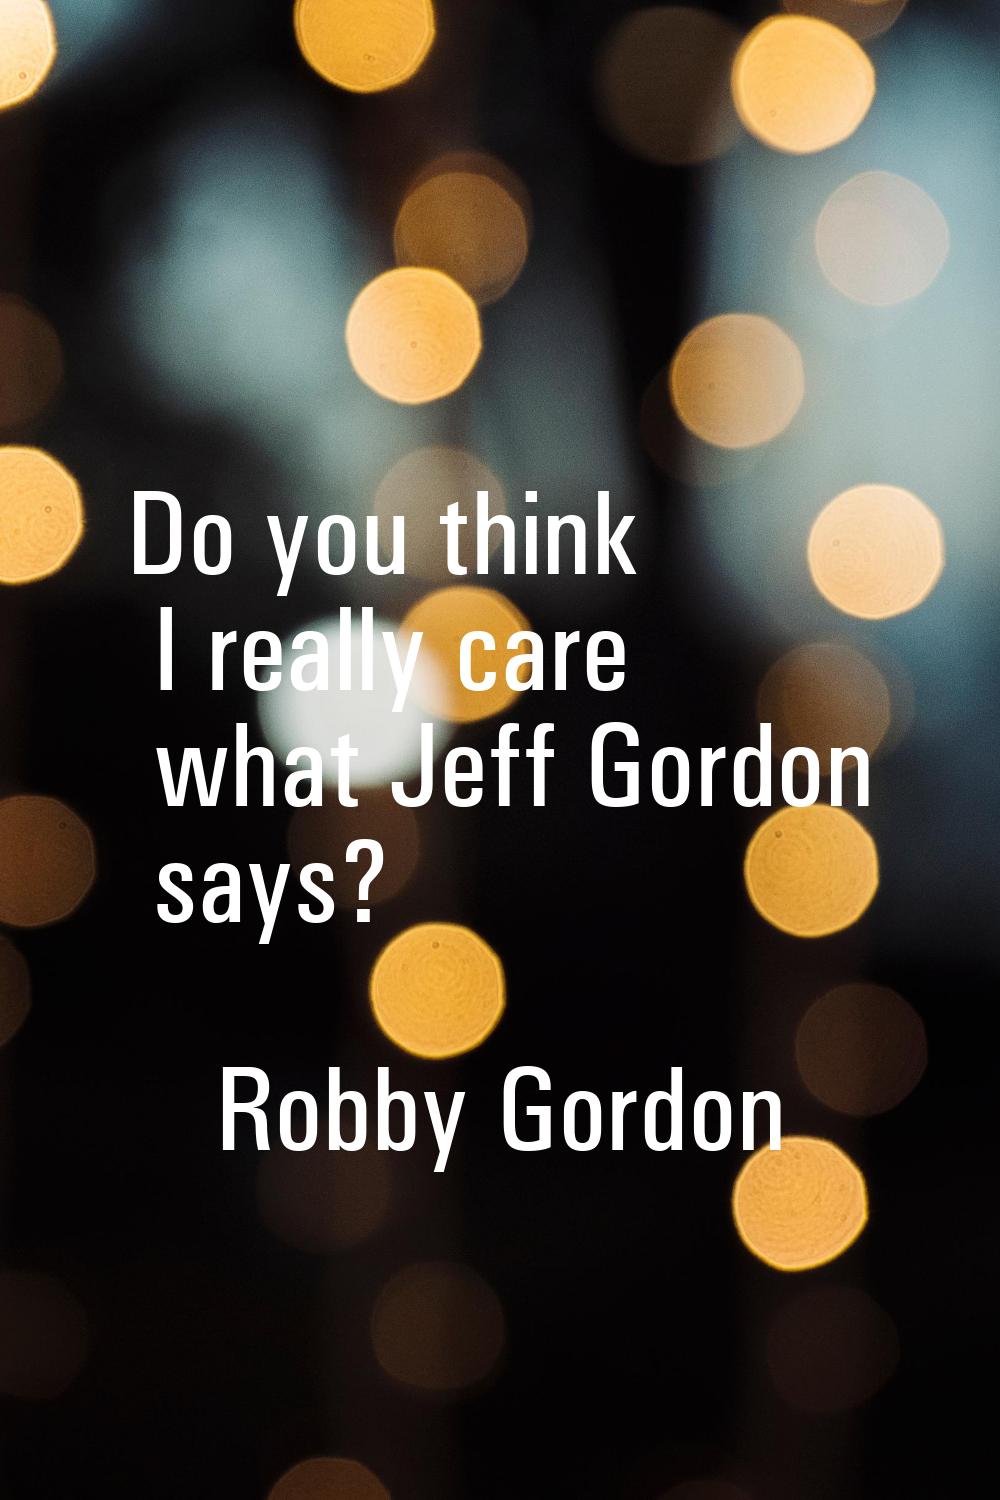 Do you think I really care what Jeff Gordon says?